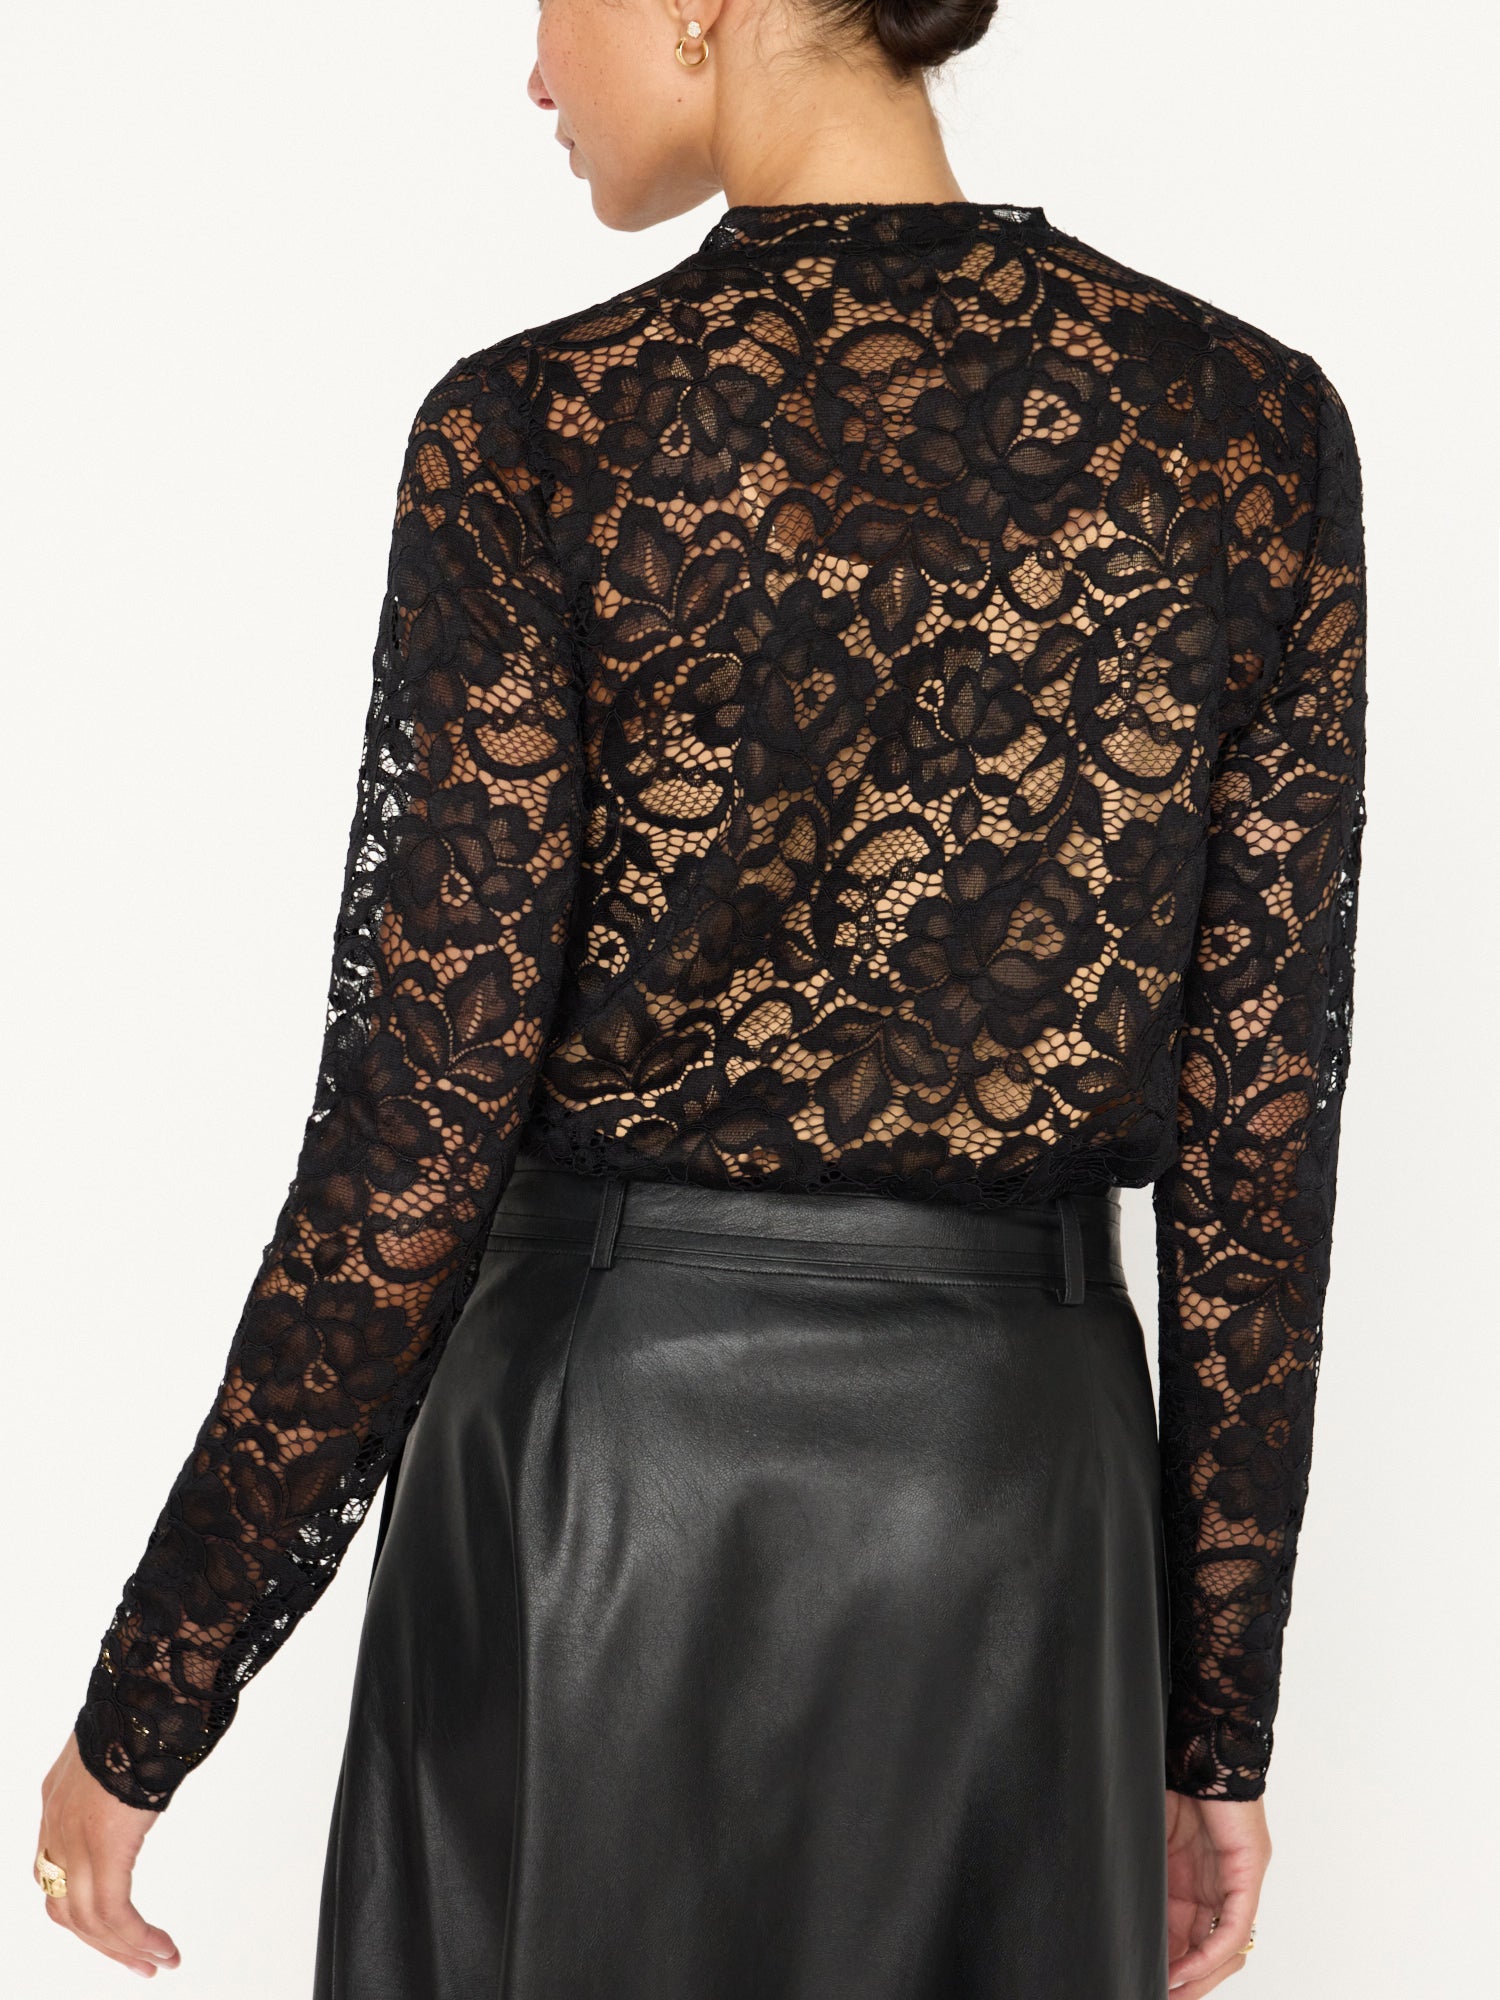 Donne black lace long sleeve top back view